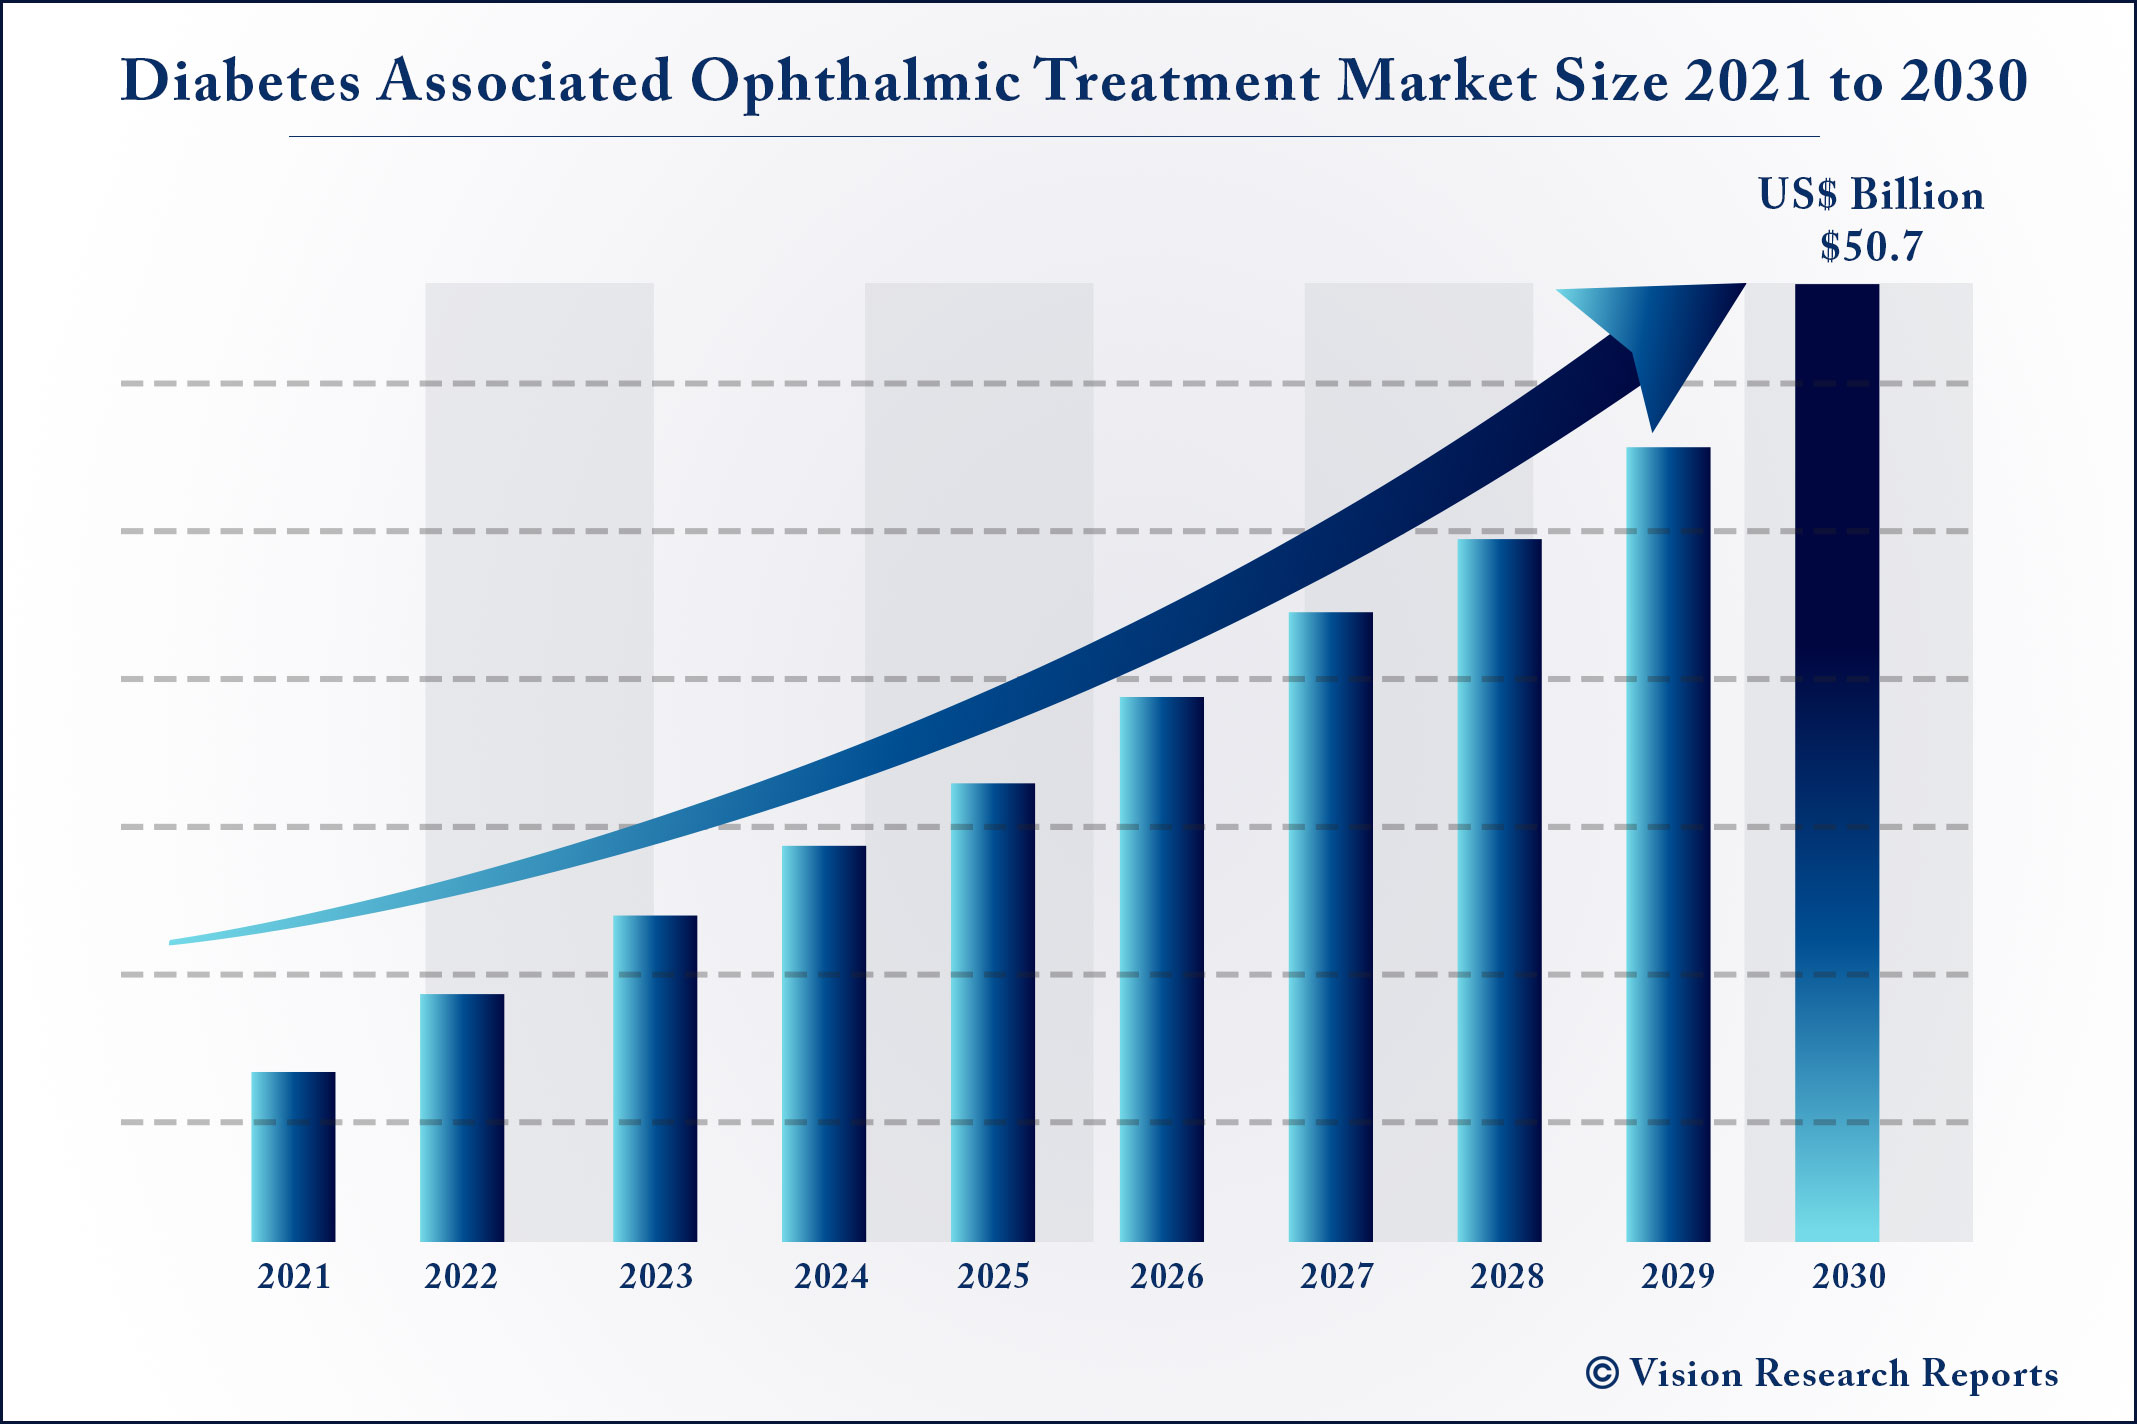 Diabetes Associated Ophthalmic Treatment Market Size 2021 to 2030